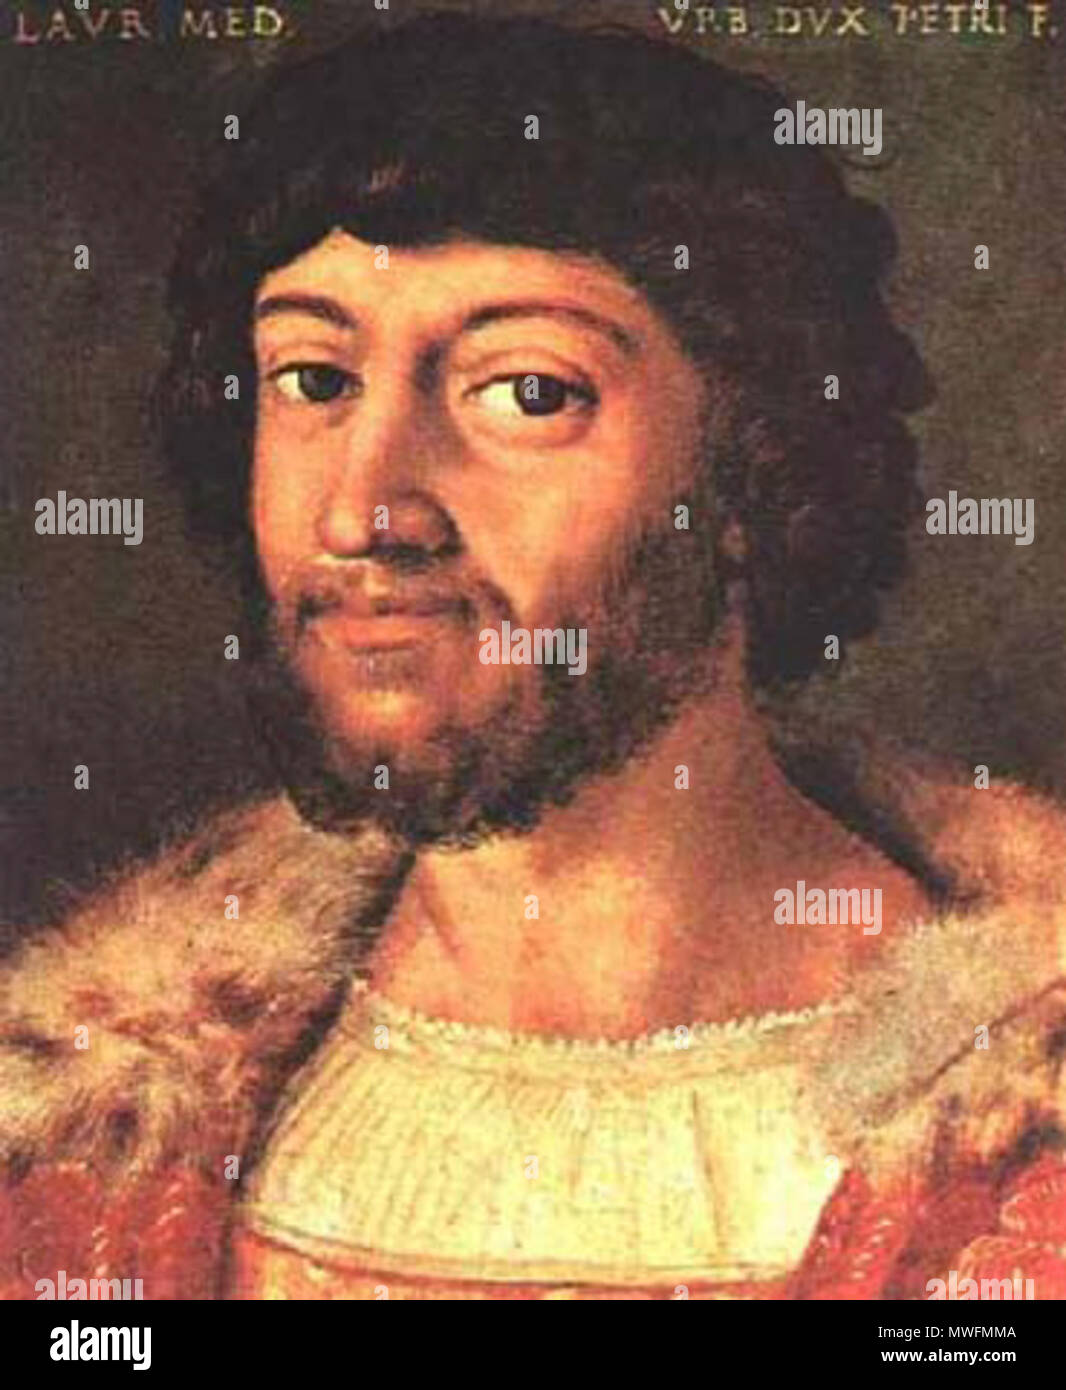 . Lorenzo di Piero de' Medici (September 12, 1492 – May 4, 1519) was the ruler of Florence from 1513 to his untimely death from syphilis in 1519. He was also Duke of Urbino for a short while. Niccolò Machiavelli's The Prince was dedicated to him, as a young ruler who might unite all Italy by expelling the foreign occupiers. 16th century . 28 August 2007. Unknown 376 Lorenzo Second Medici Stock Photo